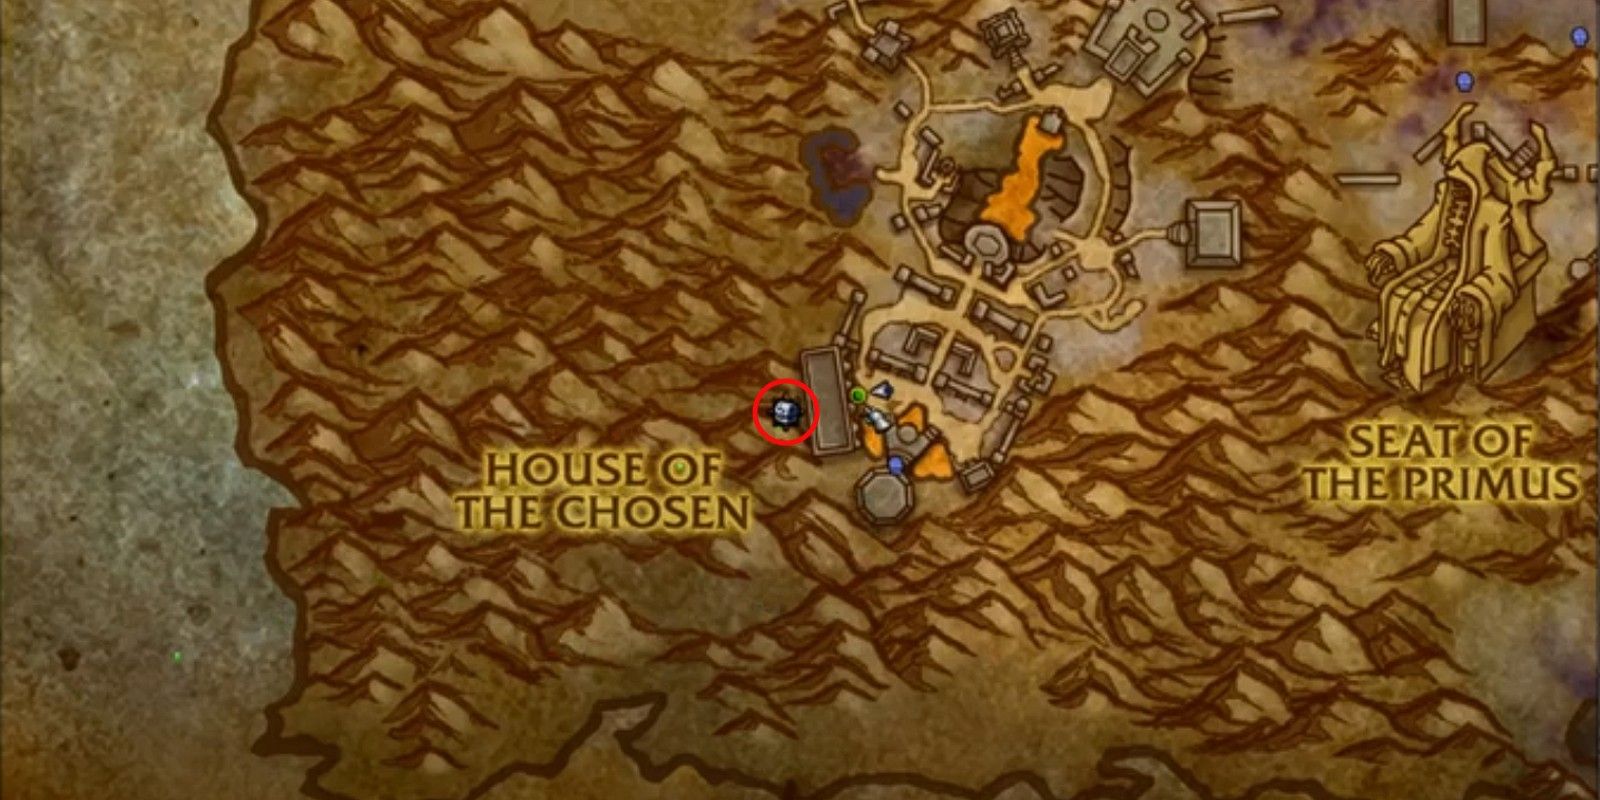 The third possible spawn location for the Bonebound Chest on the map in World of Warcraft: Shadowlands